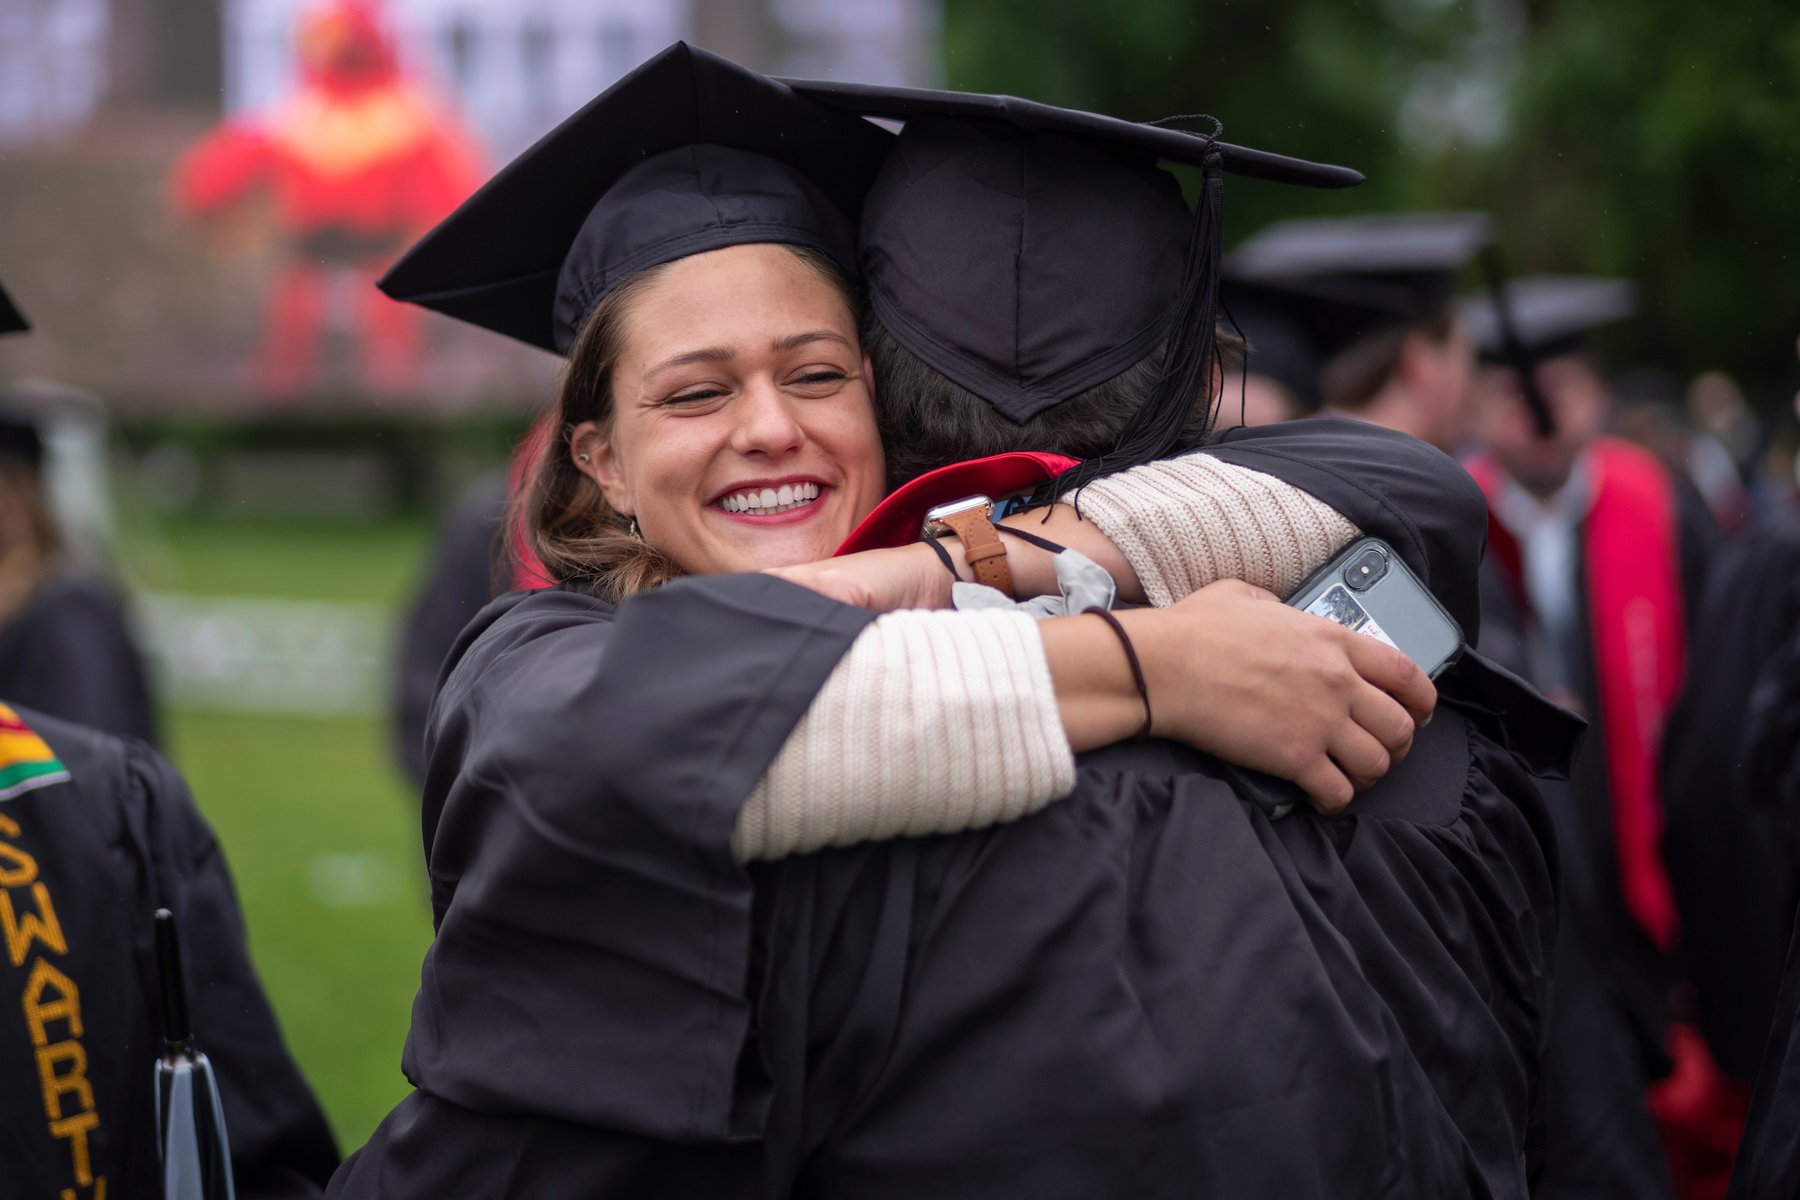 Student wearing graduation robe and cap hugs person